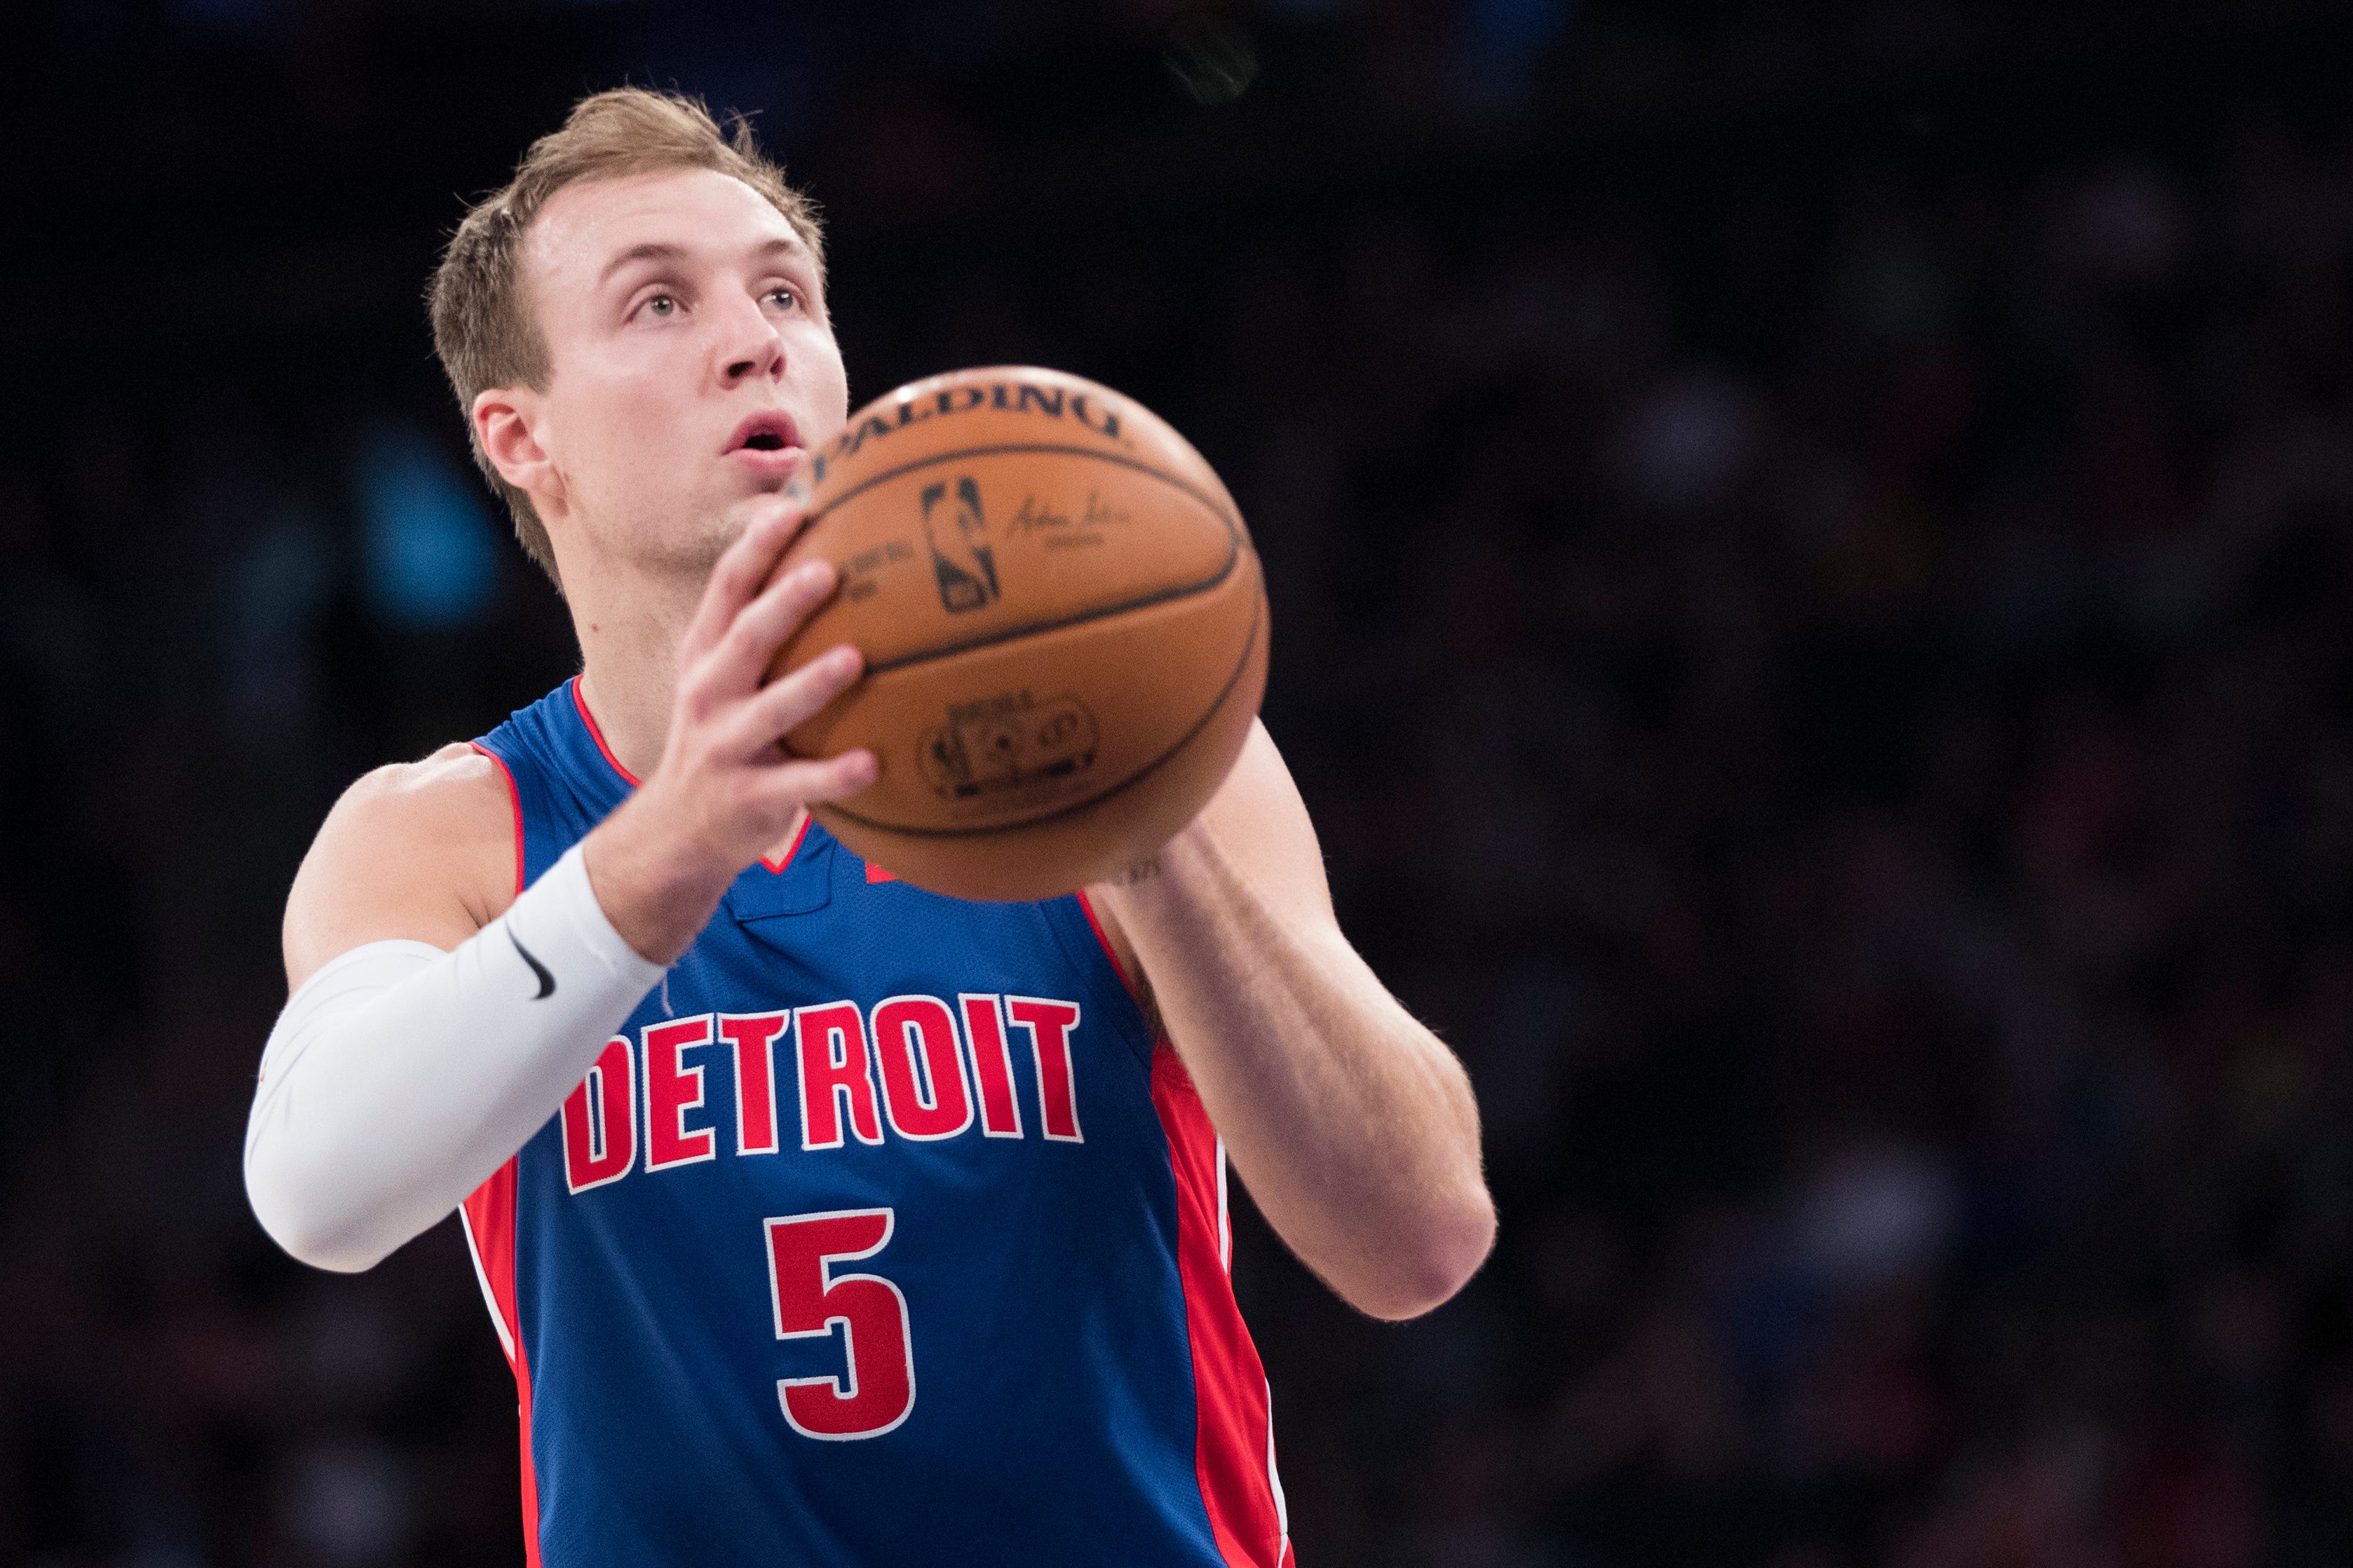 4. SG Luke Kennard, age 23: In his third season, Kennard is becoming one of the bedrocks of the Pistons’ long-term future. In most Pistons trade conversations, his name is mentioned as a desired piece because of his rookie contract and projected production, beyond the 9.7 points and 39 percent on 3-pointers from last season. If there’s a big Pistons trade for a superstar, Kennard’s name is likely to be mentioned.